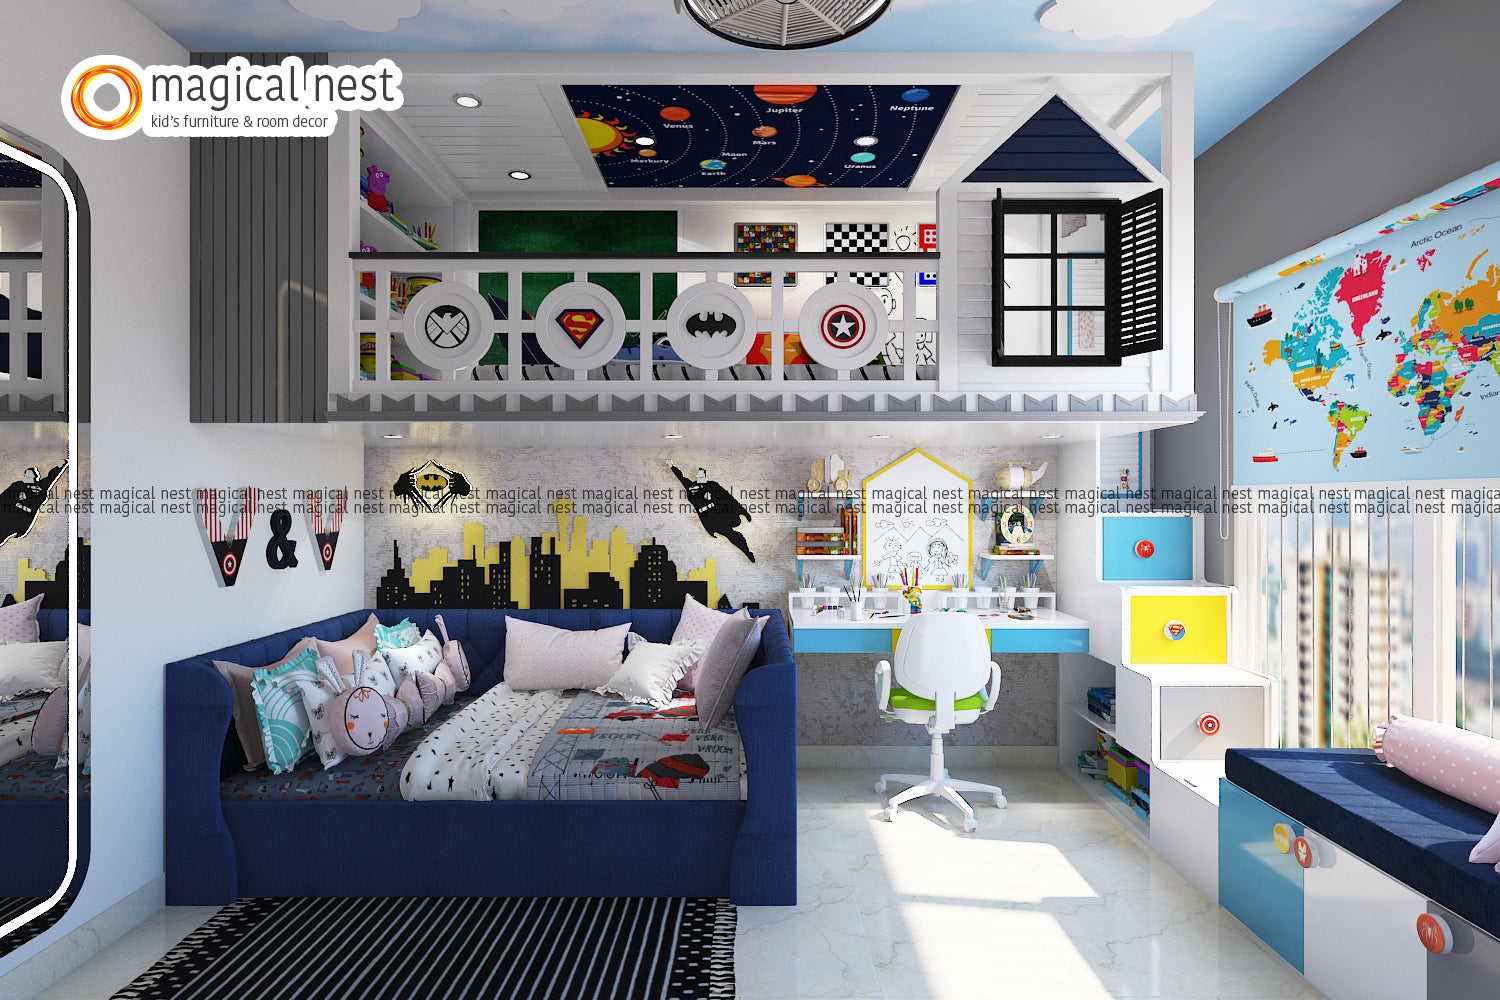 Superhero themed kids' room. It has stairs  cum draws for storage and to climb up to the loft play area designed with the logos of heroes. A study table and a comfortable bed alongside a bedroom bench by the window.